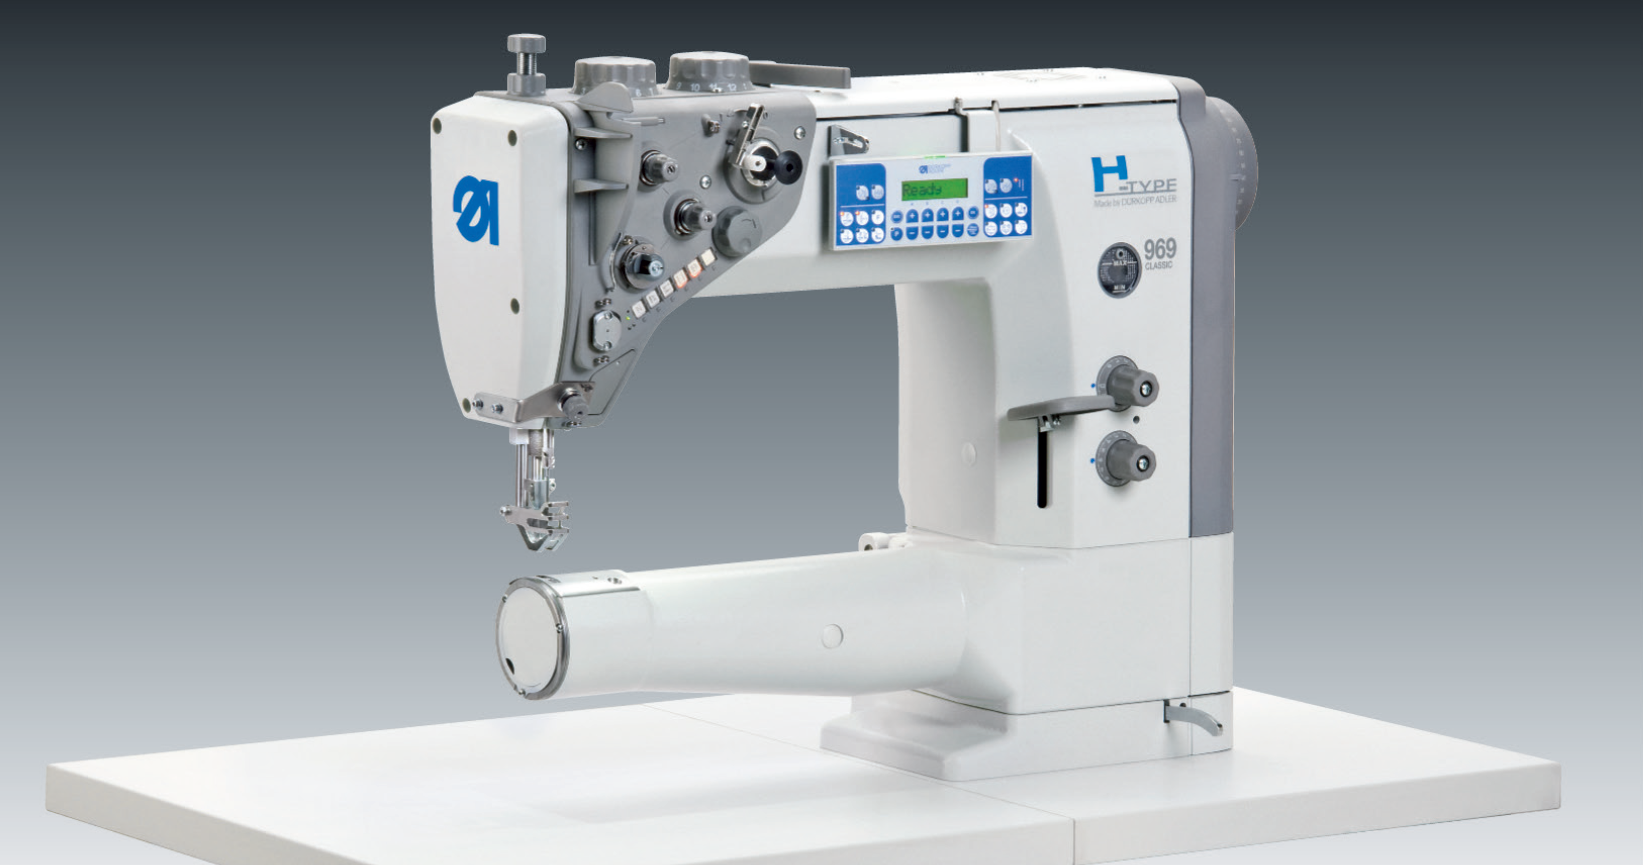 H-TYPE 969 – CLASSIC version of the cylinder arm machine for extreme applications